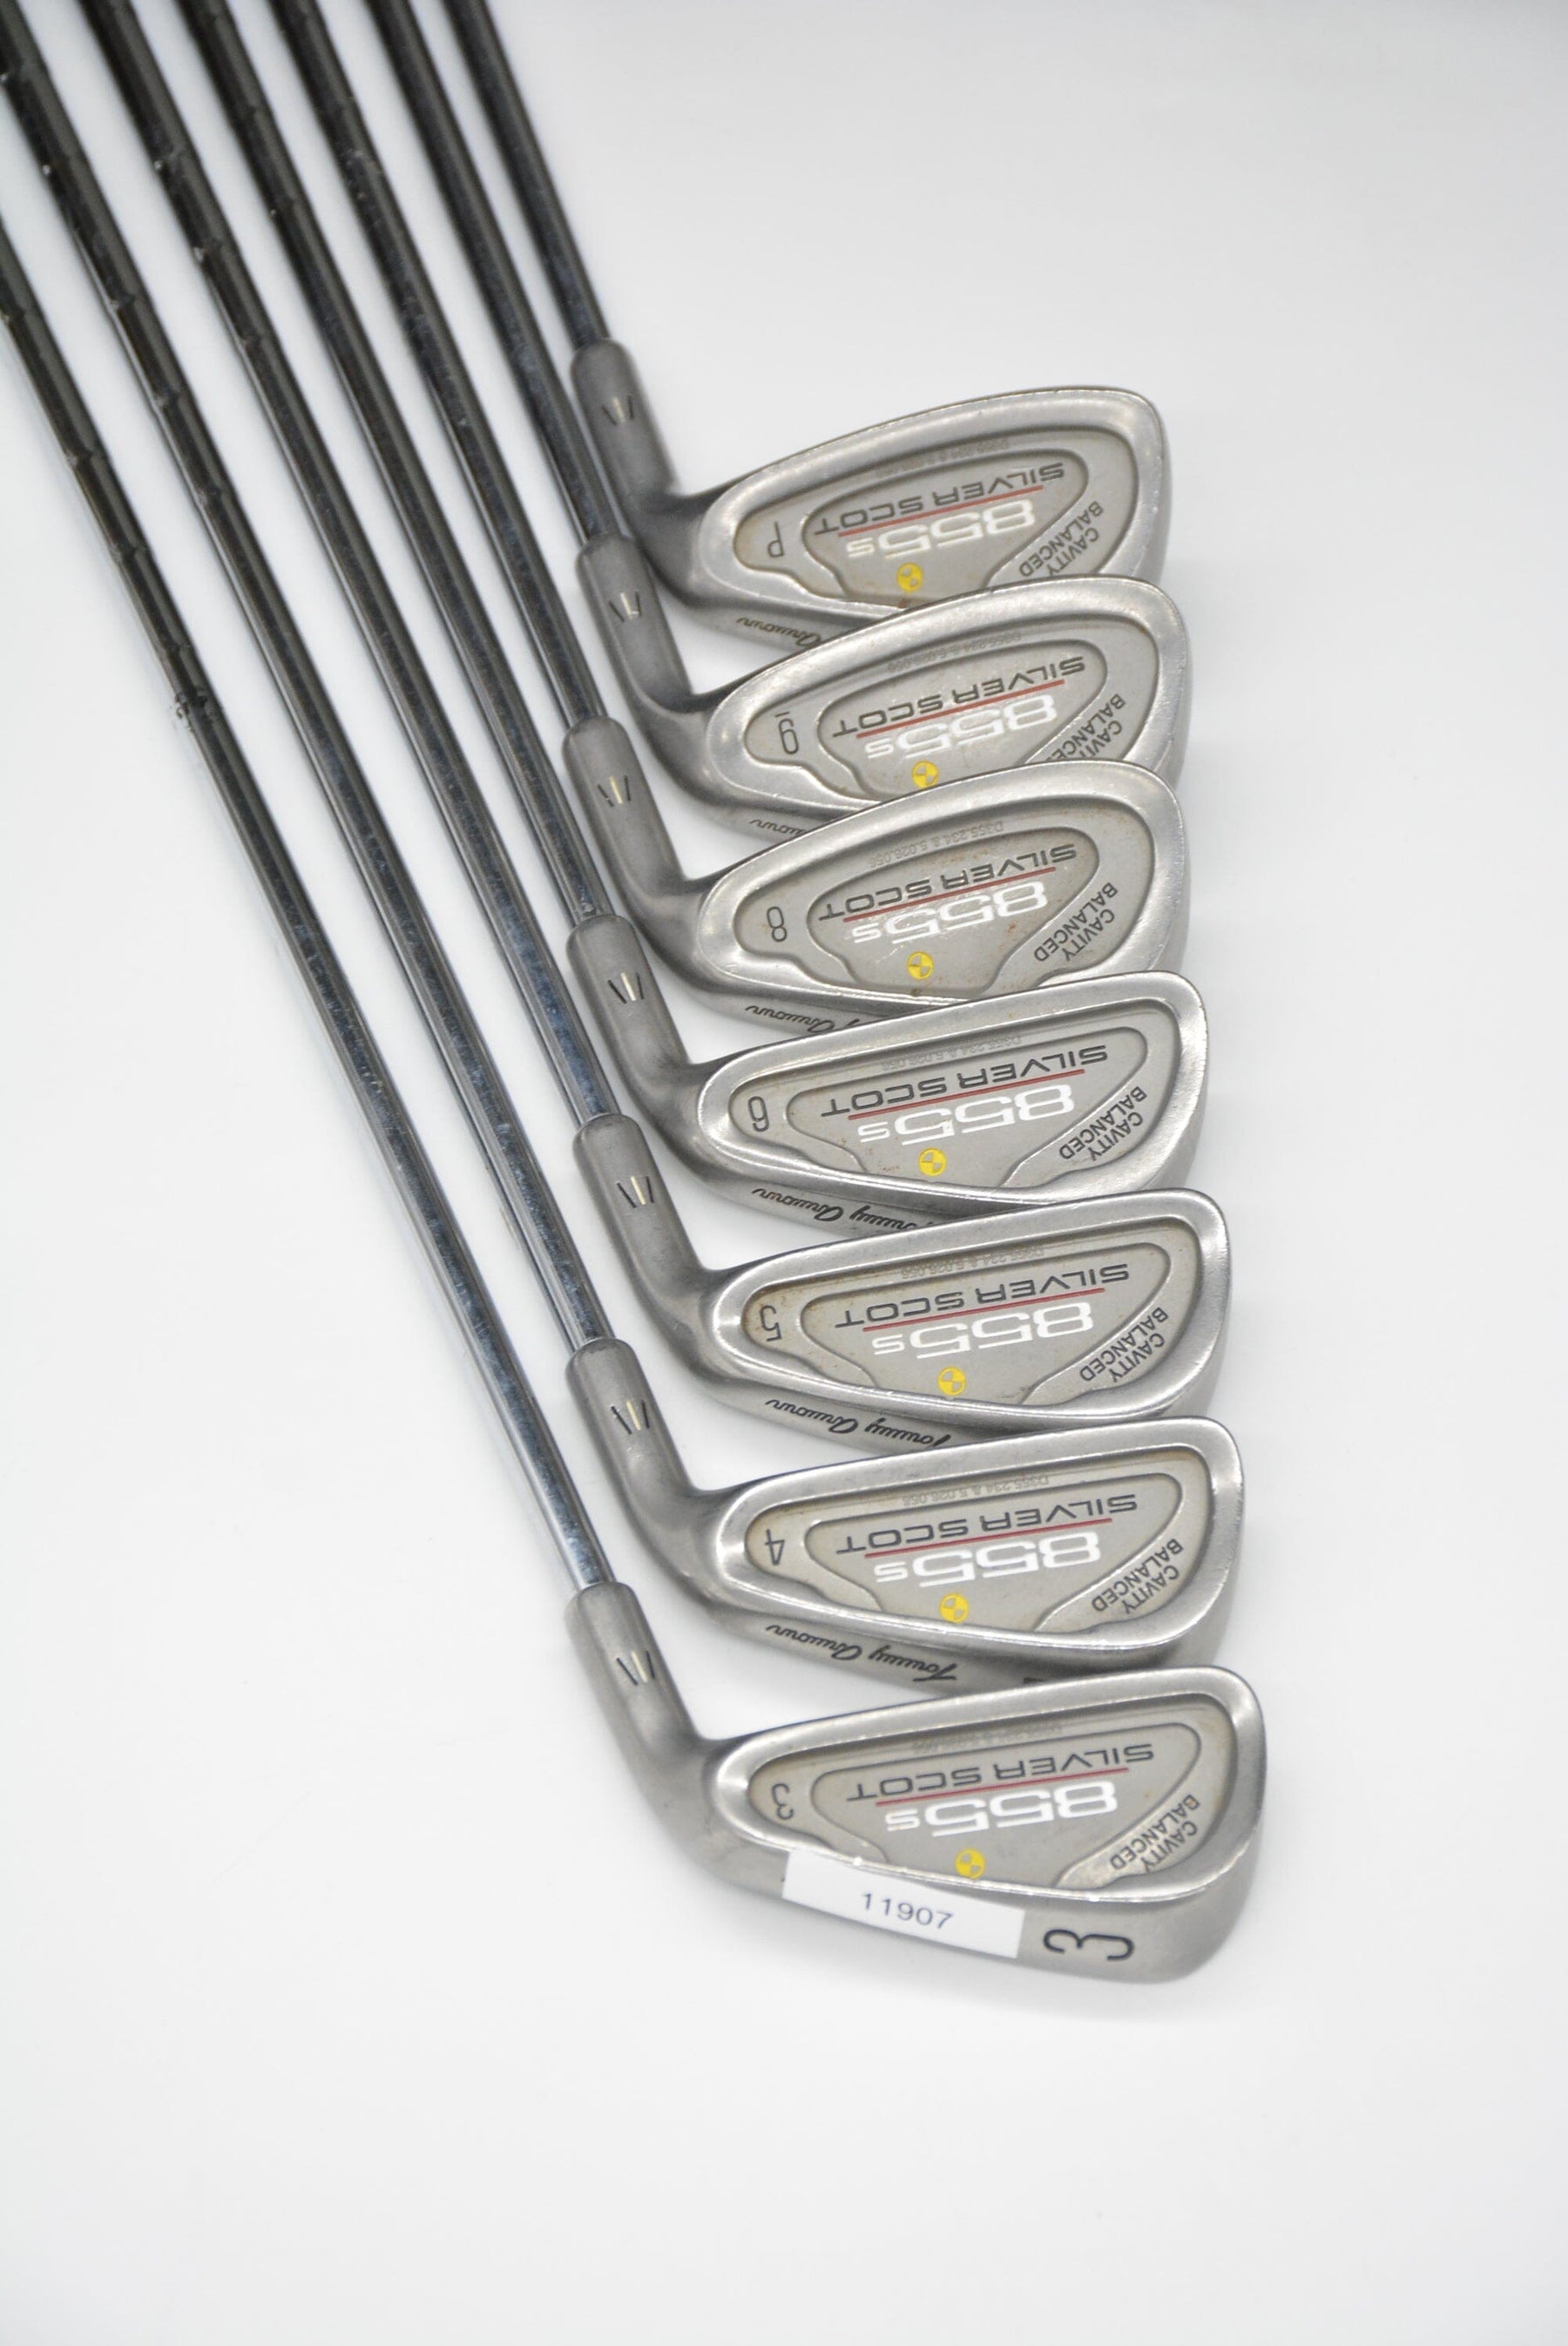 Tommy Armour 855S Silver Scot 3-6, 8-PW Iron Set S Flex +0.25" Golf Clubs GolfRoots 